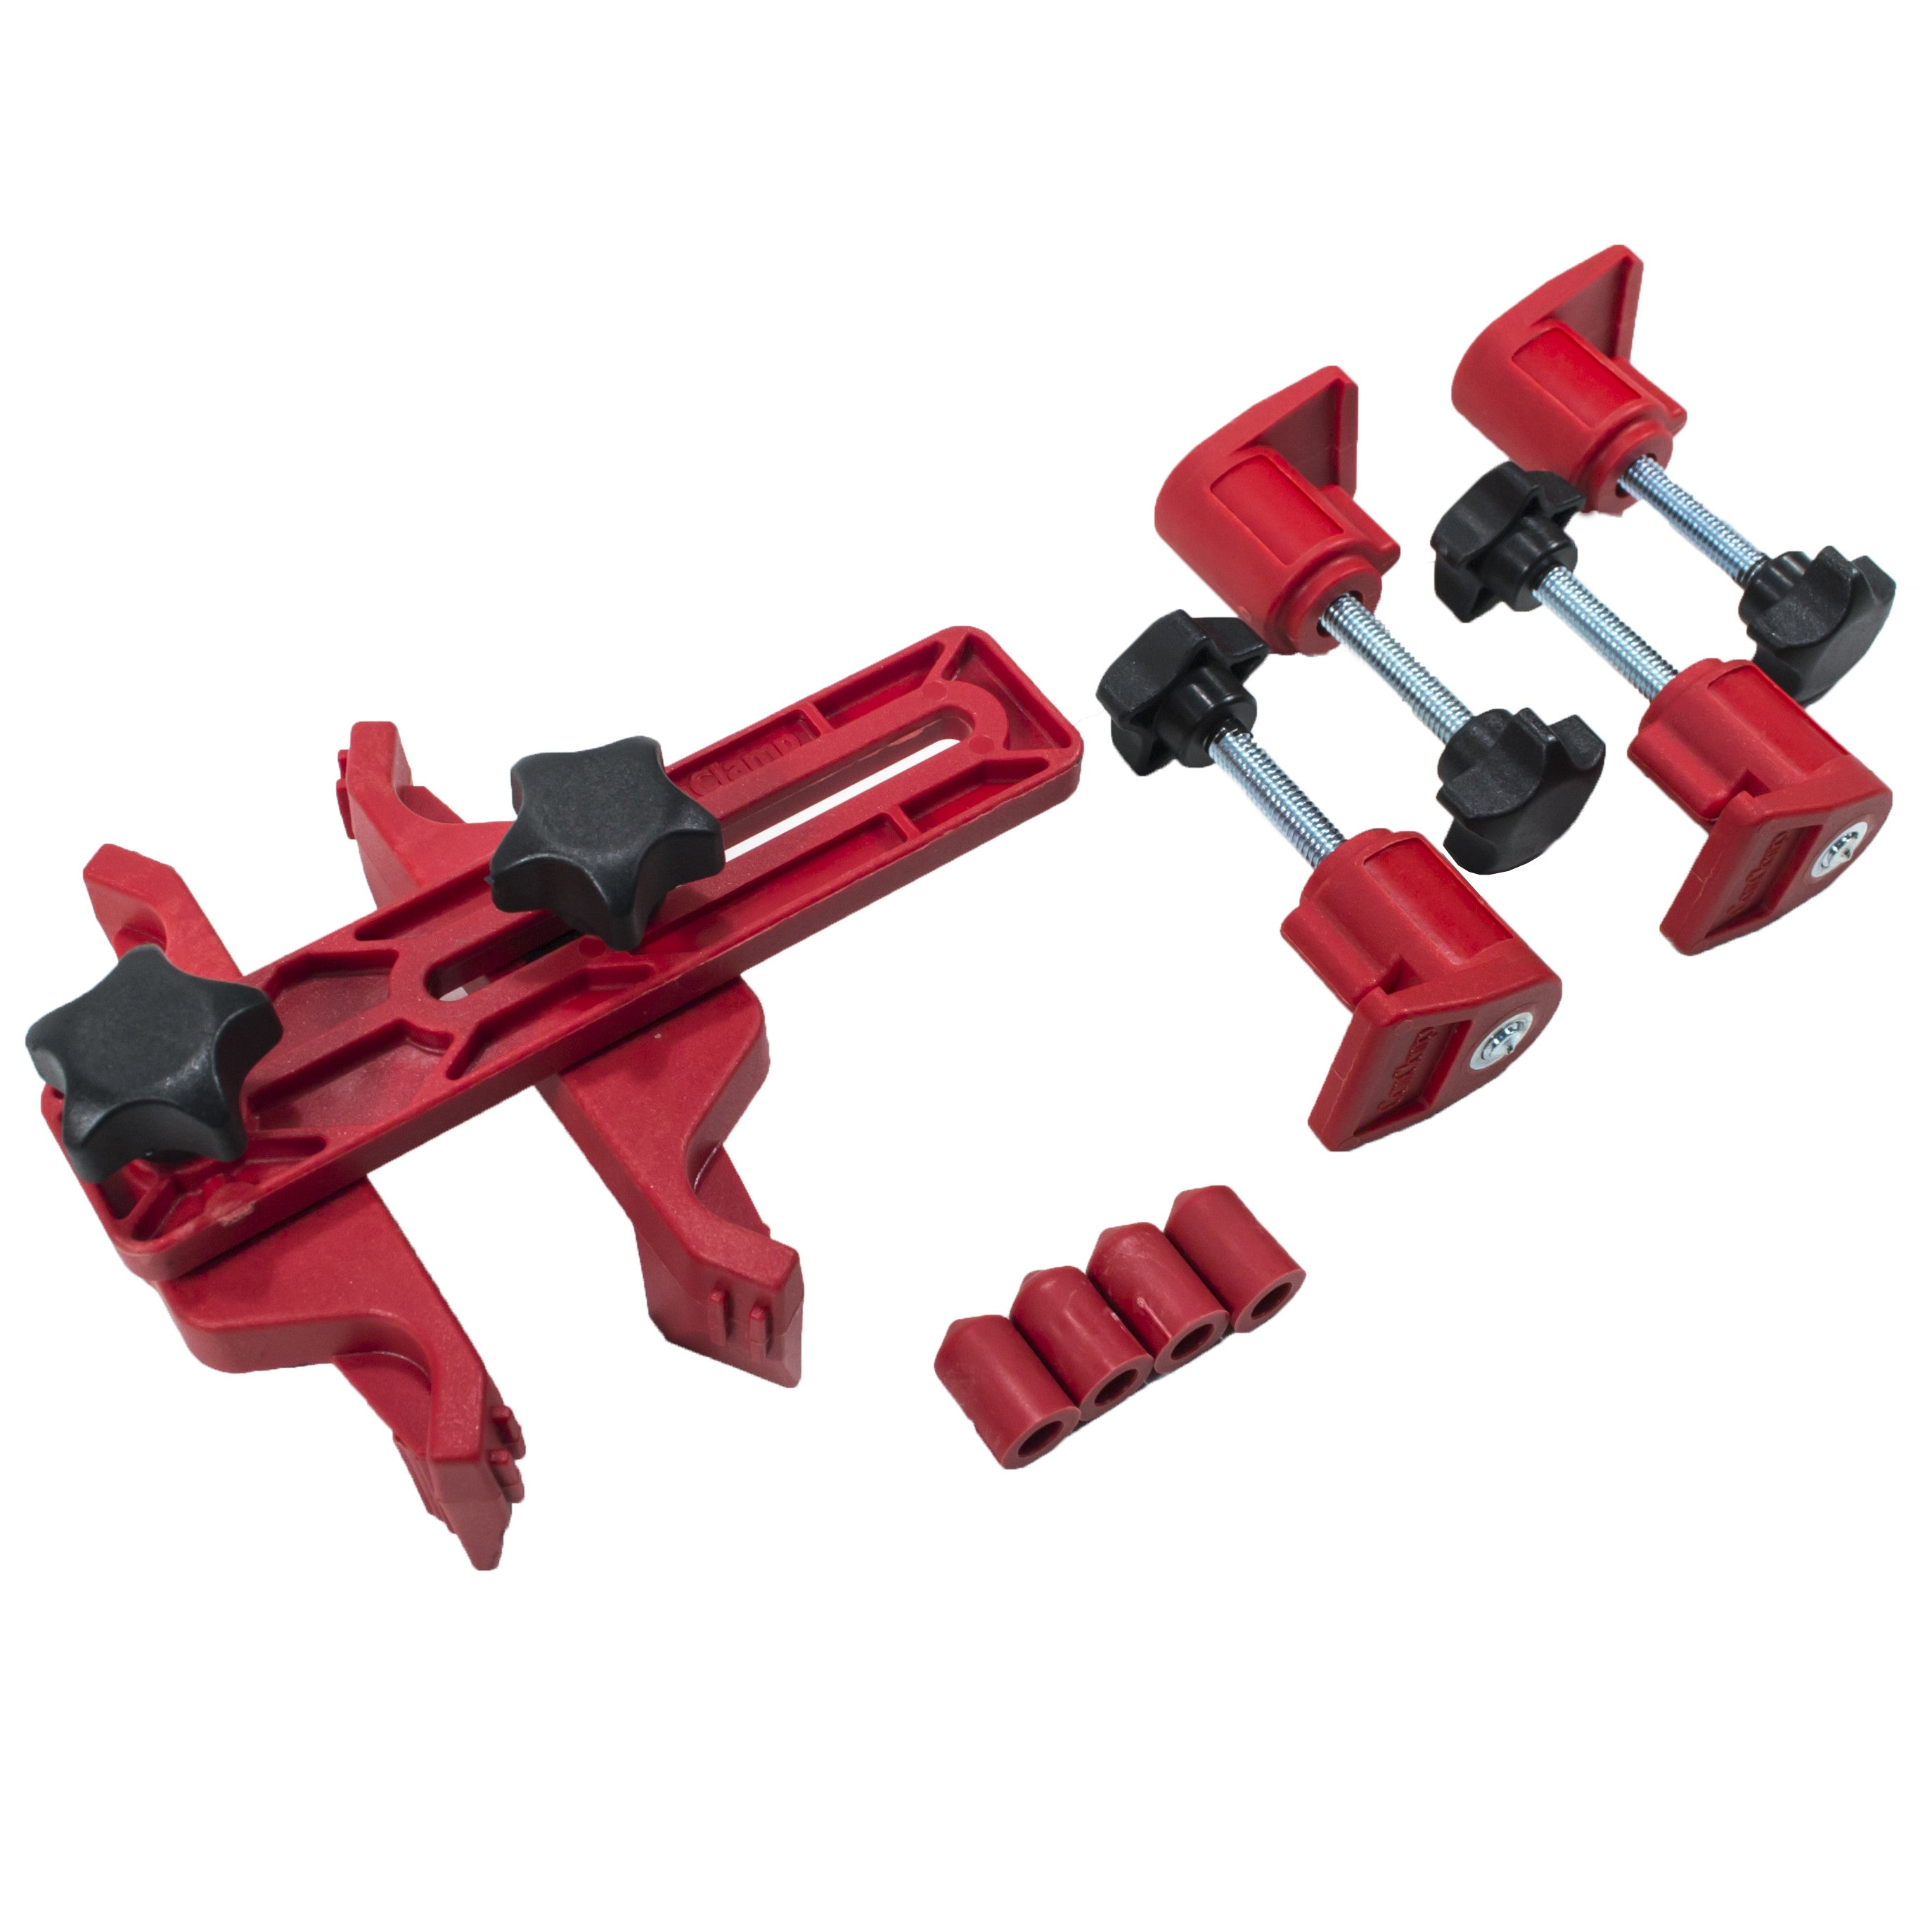 Timing Gear Clamp Set - Holds Valve Timing - Single, dual or quad overhead cam